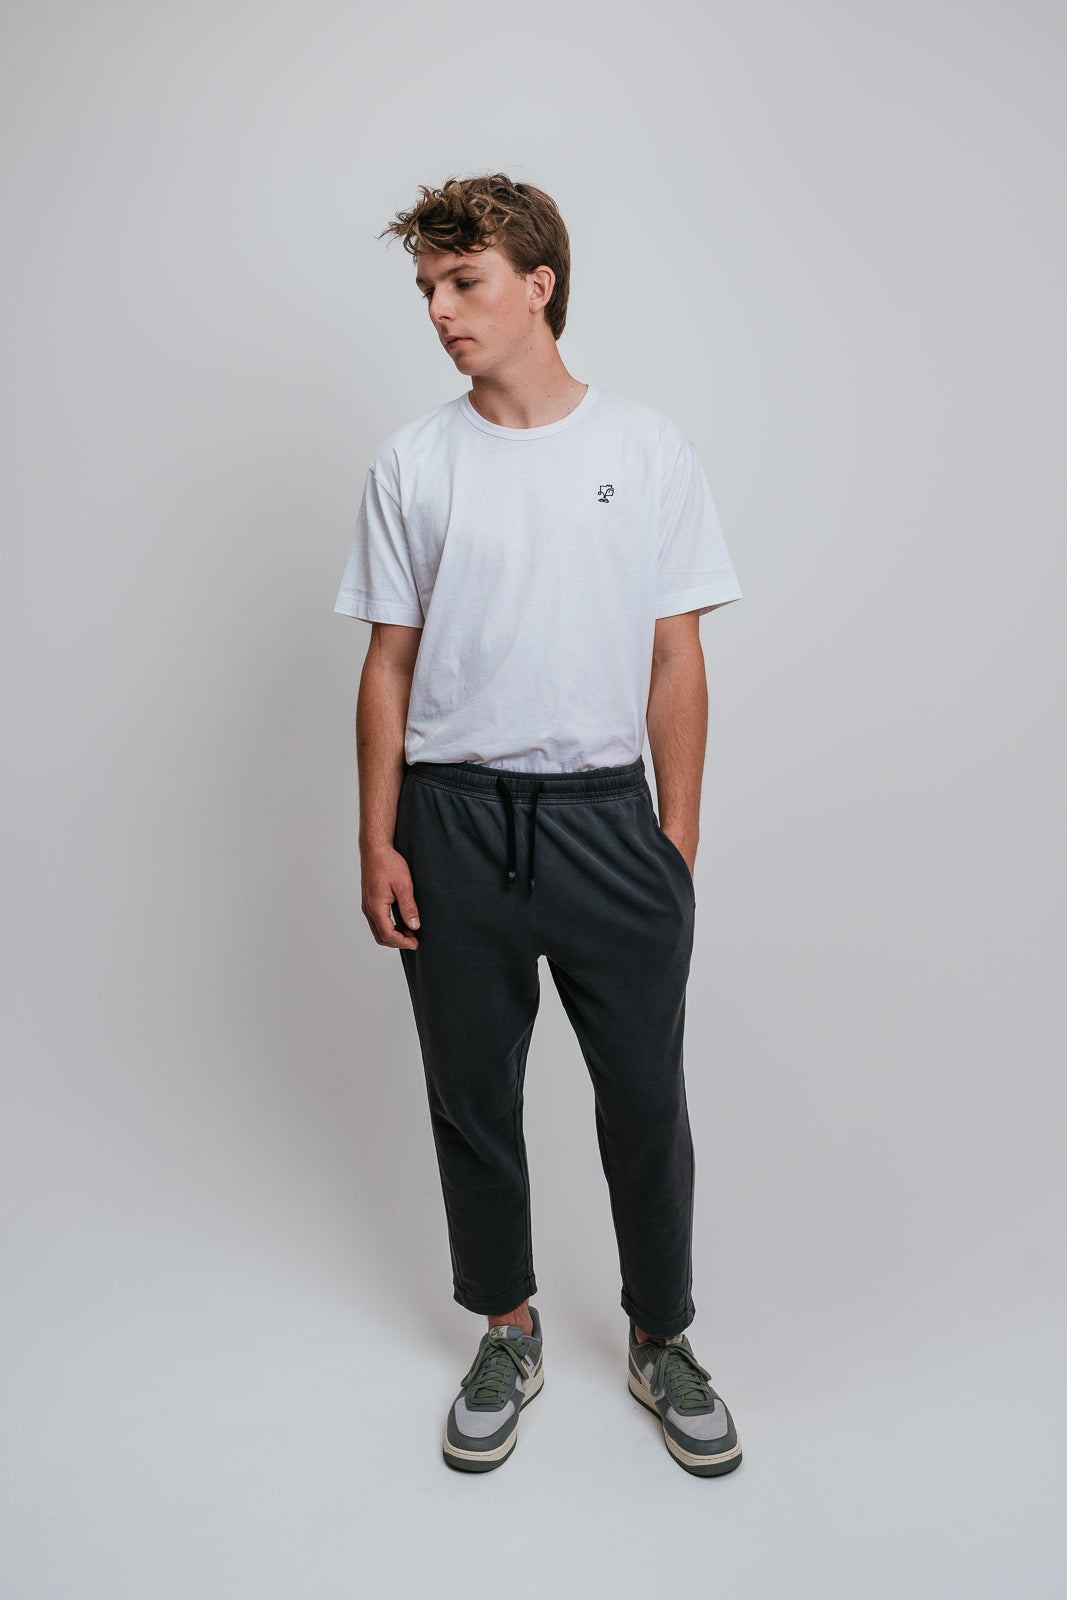 Homer Trackie | Carbon | Mens